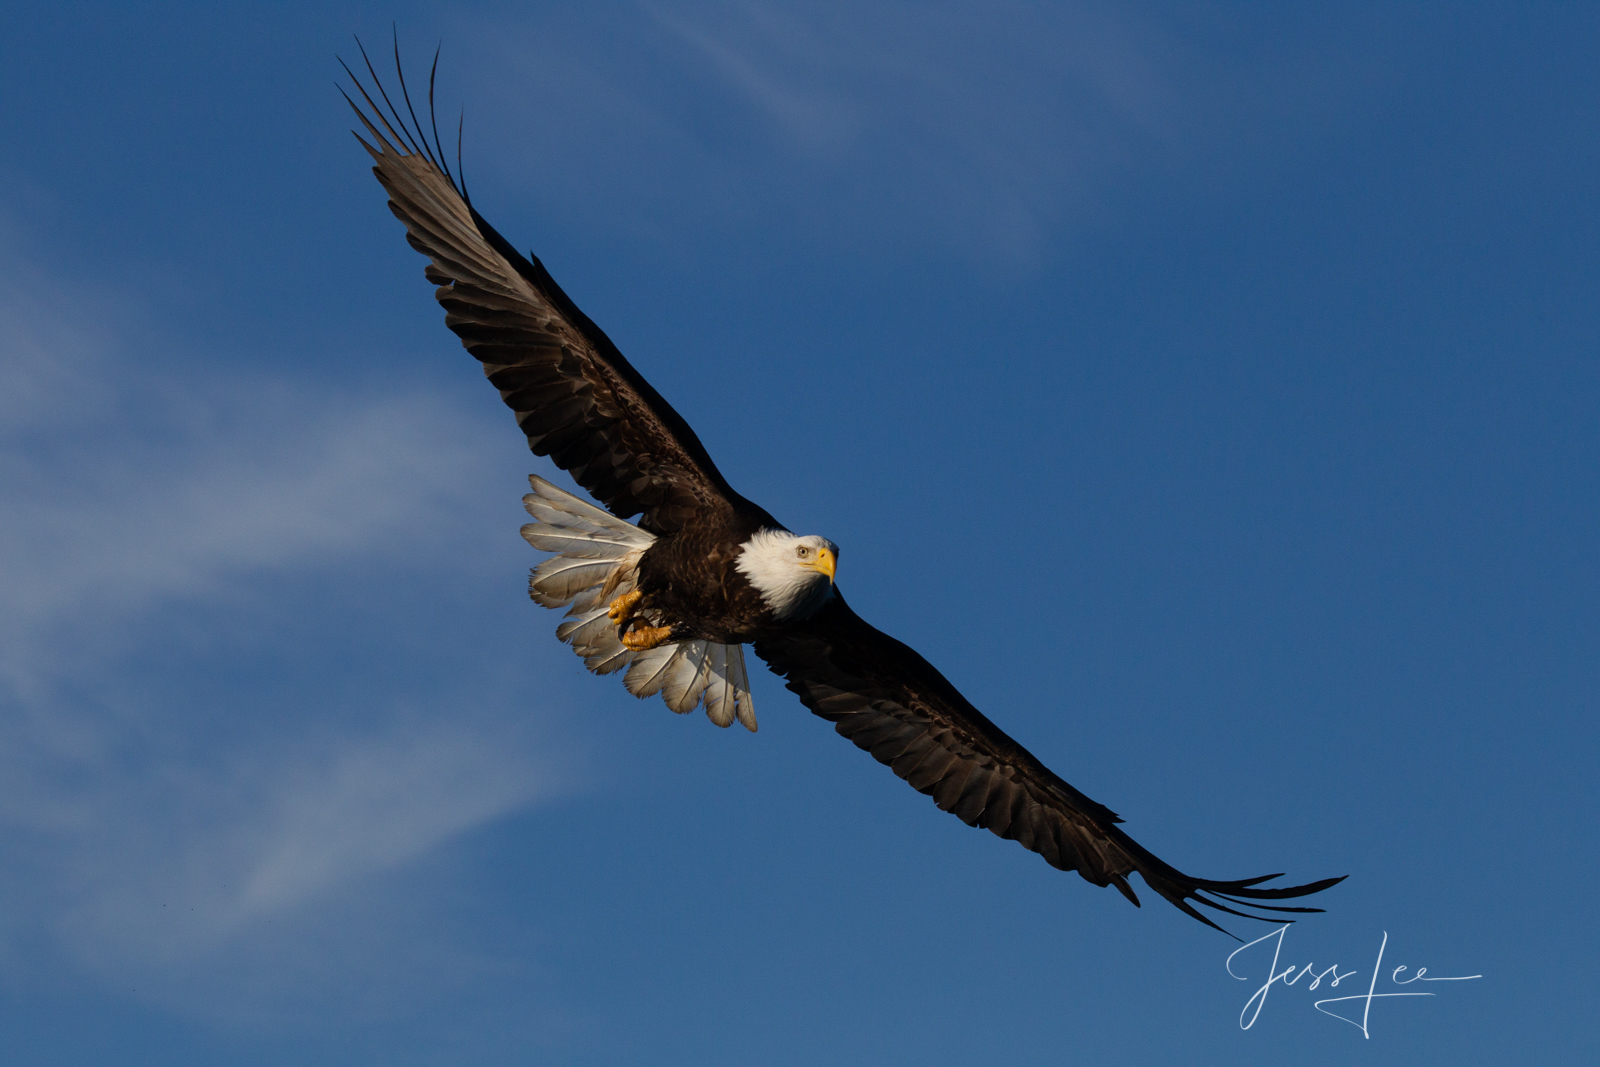 Bring home the power and beauty of the amazing fine art American Bald Eagle photograph The Bank by Jess Lee from his Wildlife...